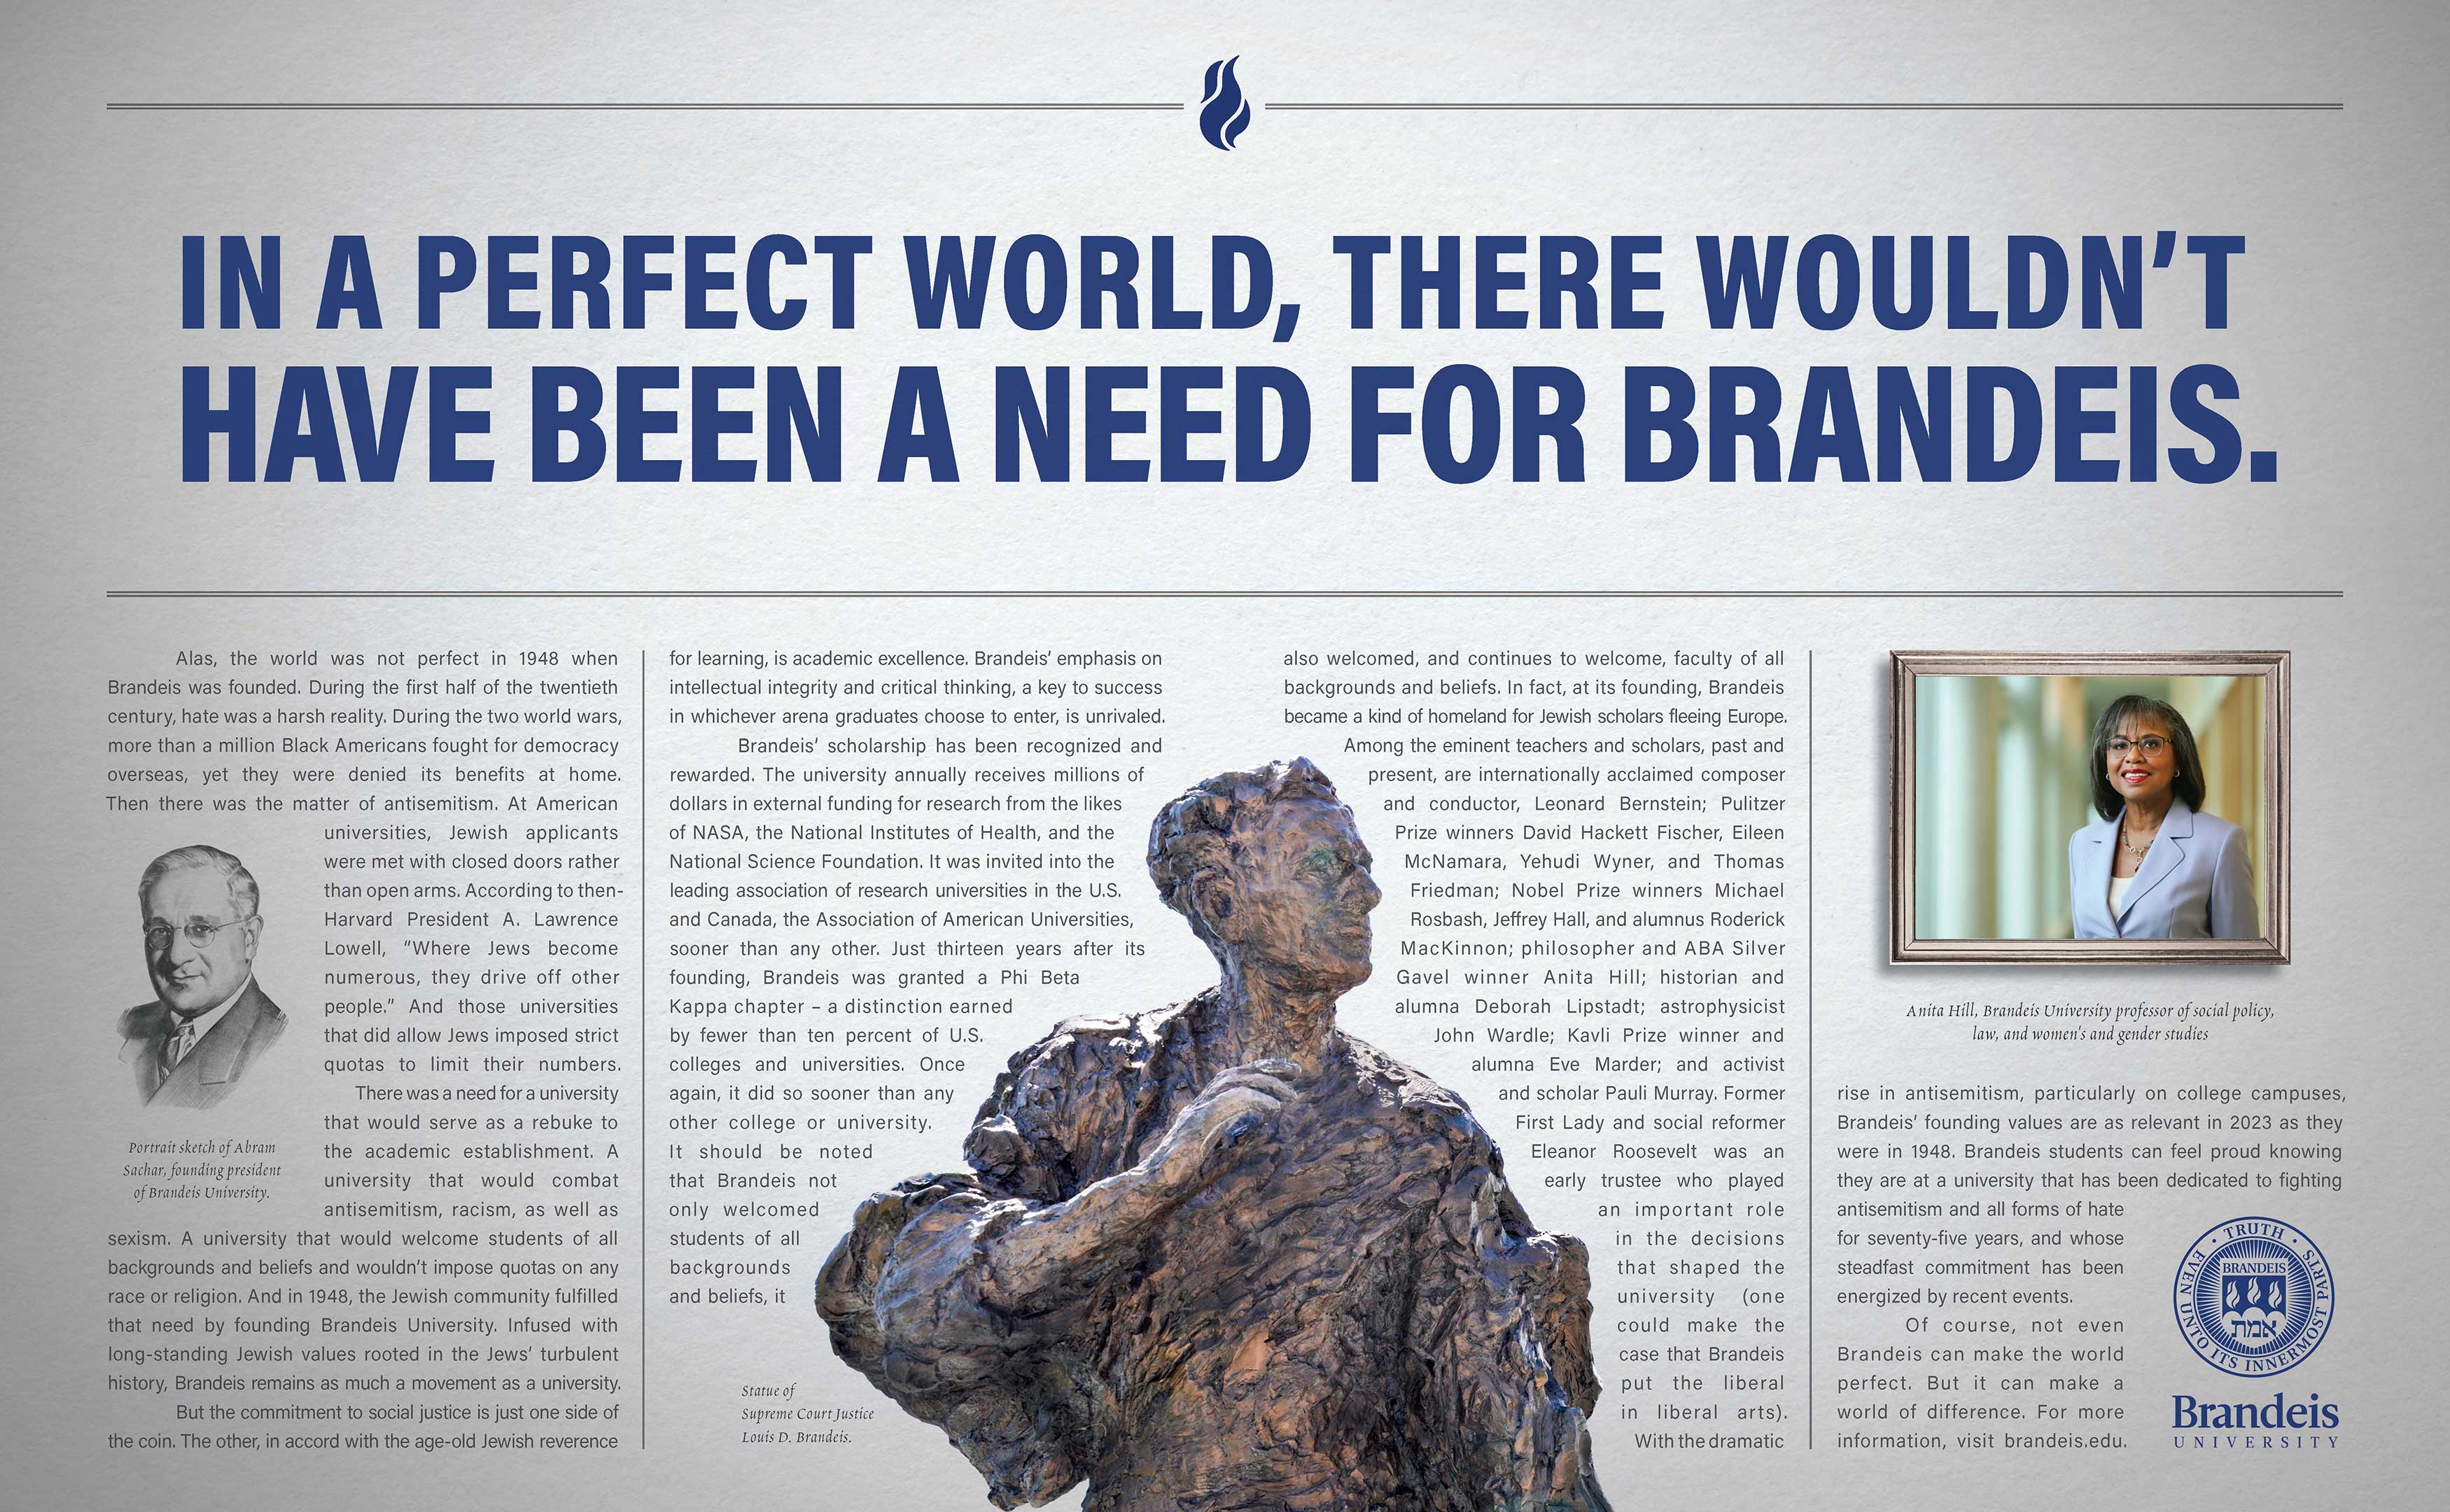 Ad headline: In a perfect world, there wouldn’t have been a need for Brandeis. Ad text: Alas, the world was not perfect in 1948 when Brandeis was founded. During the first half of the twentieth century, hate was a harsh reality. During the two world wars, more than a million Black Americans fought for democracy overseas, yet they were denied its benefits at home. Then there was the matter of antisemitism. (Inline image: Portrait sketch of Abram Sachar, founding president of Brandeis University.) At American universities, Jewish applicants were met with closed doors rather than open arms. According to then-Harvard President A. Lawrence Lowell, “Where Jews become numerous, they drive off other people.” And those universities that did allow Jews imposed strict quotas to limit their numbers. There was a need for a university that would serve as a rebuke to the academic establishment. A university that would combat antisemitism, racism, as well as sexism. A university that would welcome students of all backgrounds and beliefs and wouldn’t impose quotas on any race or religion. And in 1948, the Jewish community fulfilled that need by founding Brandeis University. Infused with long-standing Jewish values rooted in the Jews’ turbulent history, Brandeis remains as much a movement as a university. But the commitment to social justice is just one side of the coin. The other, in accord with the age-old Jewish reverence for learning, is academic excellence. Brandeis’ emphasis on intellectual integrity and critical thinking, a key to success in whichever arena graduates choose to enter, is unrivaled. Brandeis’ scholarship has been recognized and rewarded. The university annually receives millions of dollars in external funding for research from the likes of NASA, the National Institutes of Health, and the National Science Foundation. It was invited into the leading association of research universities in the U.S. and Canada, the Association of American Universities, sooner than any other. Just thirteen years after its founding, Brandeis was granted a Phi Beta Kappa chapter – a distinction earned by fewer than ten percent of U.S. colleges and universities. Once again, it did so sooner than any other college or university. It should be noted that Brandeis not only welcomed students of all backgrounds and beliefs, it also welcomed, and continues to welcome, faculty of all backgrounds and beliefs. (Inline image: Statue of Supreme Court Justice Louis D. Brandeis.) In fact, at its founding, Brandeis became a kind of homeland for Jewish scholars fleeing Europe. Among the eminent teachers and scholars, past and present, are internationally acclaimed composer and conductor, Leonard Bernstein; Pulitzer Prize winners David Hackett Fischer, Eileen McNamara, Yehudi Wyner, and Thomas Friedman; Nobel Prize winners Michael Rosbash, Jeffrey Hall, and alumnus Roderick MacKinnon; philosopher and ABA Silver Gavel winner Anita Hill; historian and alumna Deborah Lipstadt; astrophysicist John Wardle; Kavli Prize winner and alumna Eve Marder; and activist and scholar Pauli Murray. Former First Lady and social reformer Eleanor Roosevelt was an early trustee who played an important role in the decisions that shaped the university (one could make the case that Brandeis put the liberal in liberal arts). (Inline image: Anita Hill, Brandeis University professor of social policy, law, and women's and gender studies.) With the dramatic rise in antisemitism, particularly on college campuses, Brandeis’ founding values are as relevant in 2023 as they were in 1948. Brandeis students can feel proud knowing they are at a university that has been dedicated to fighting antisemitism and all forms of hate for seventy-five years, and whose steadfast commitment has been energized by recent events. Of course, not even Brandeis can make the world perfect. But it can make a world of difference.